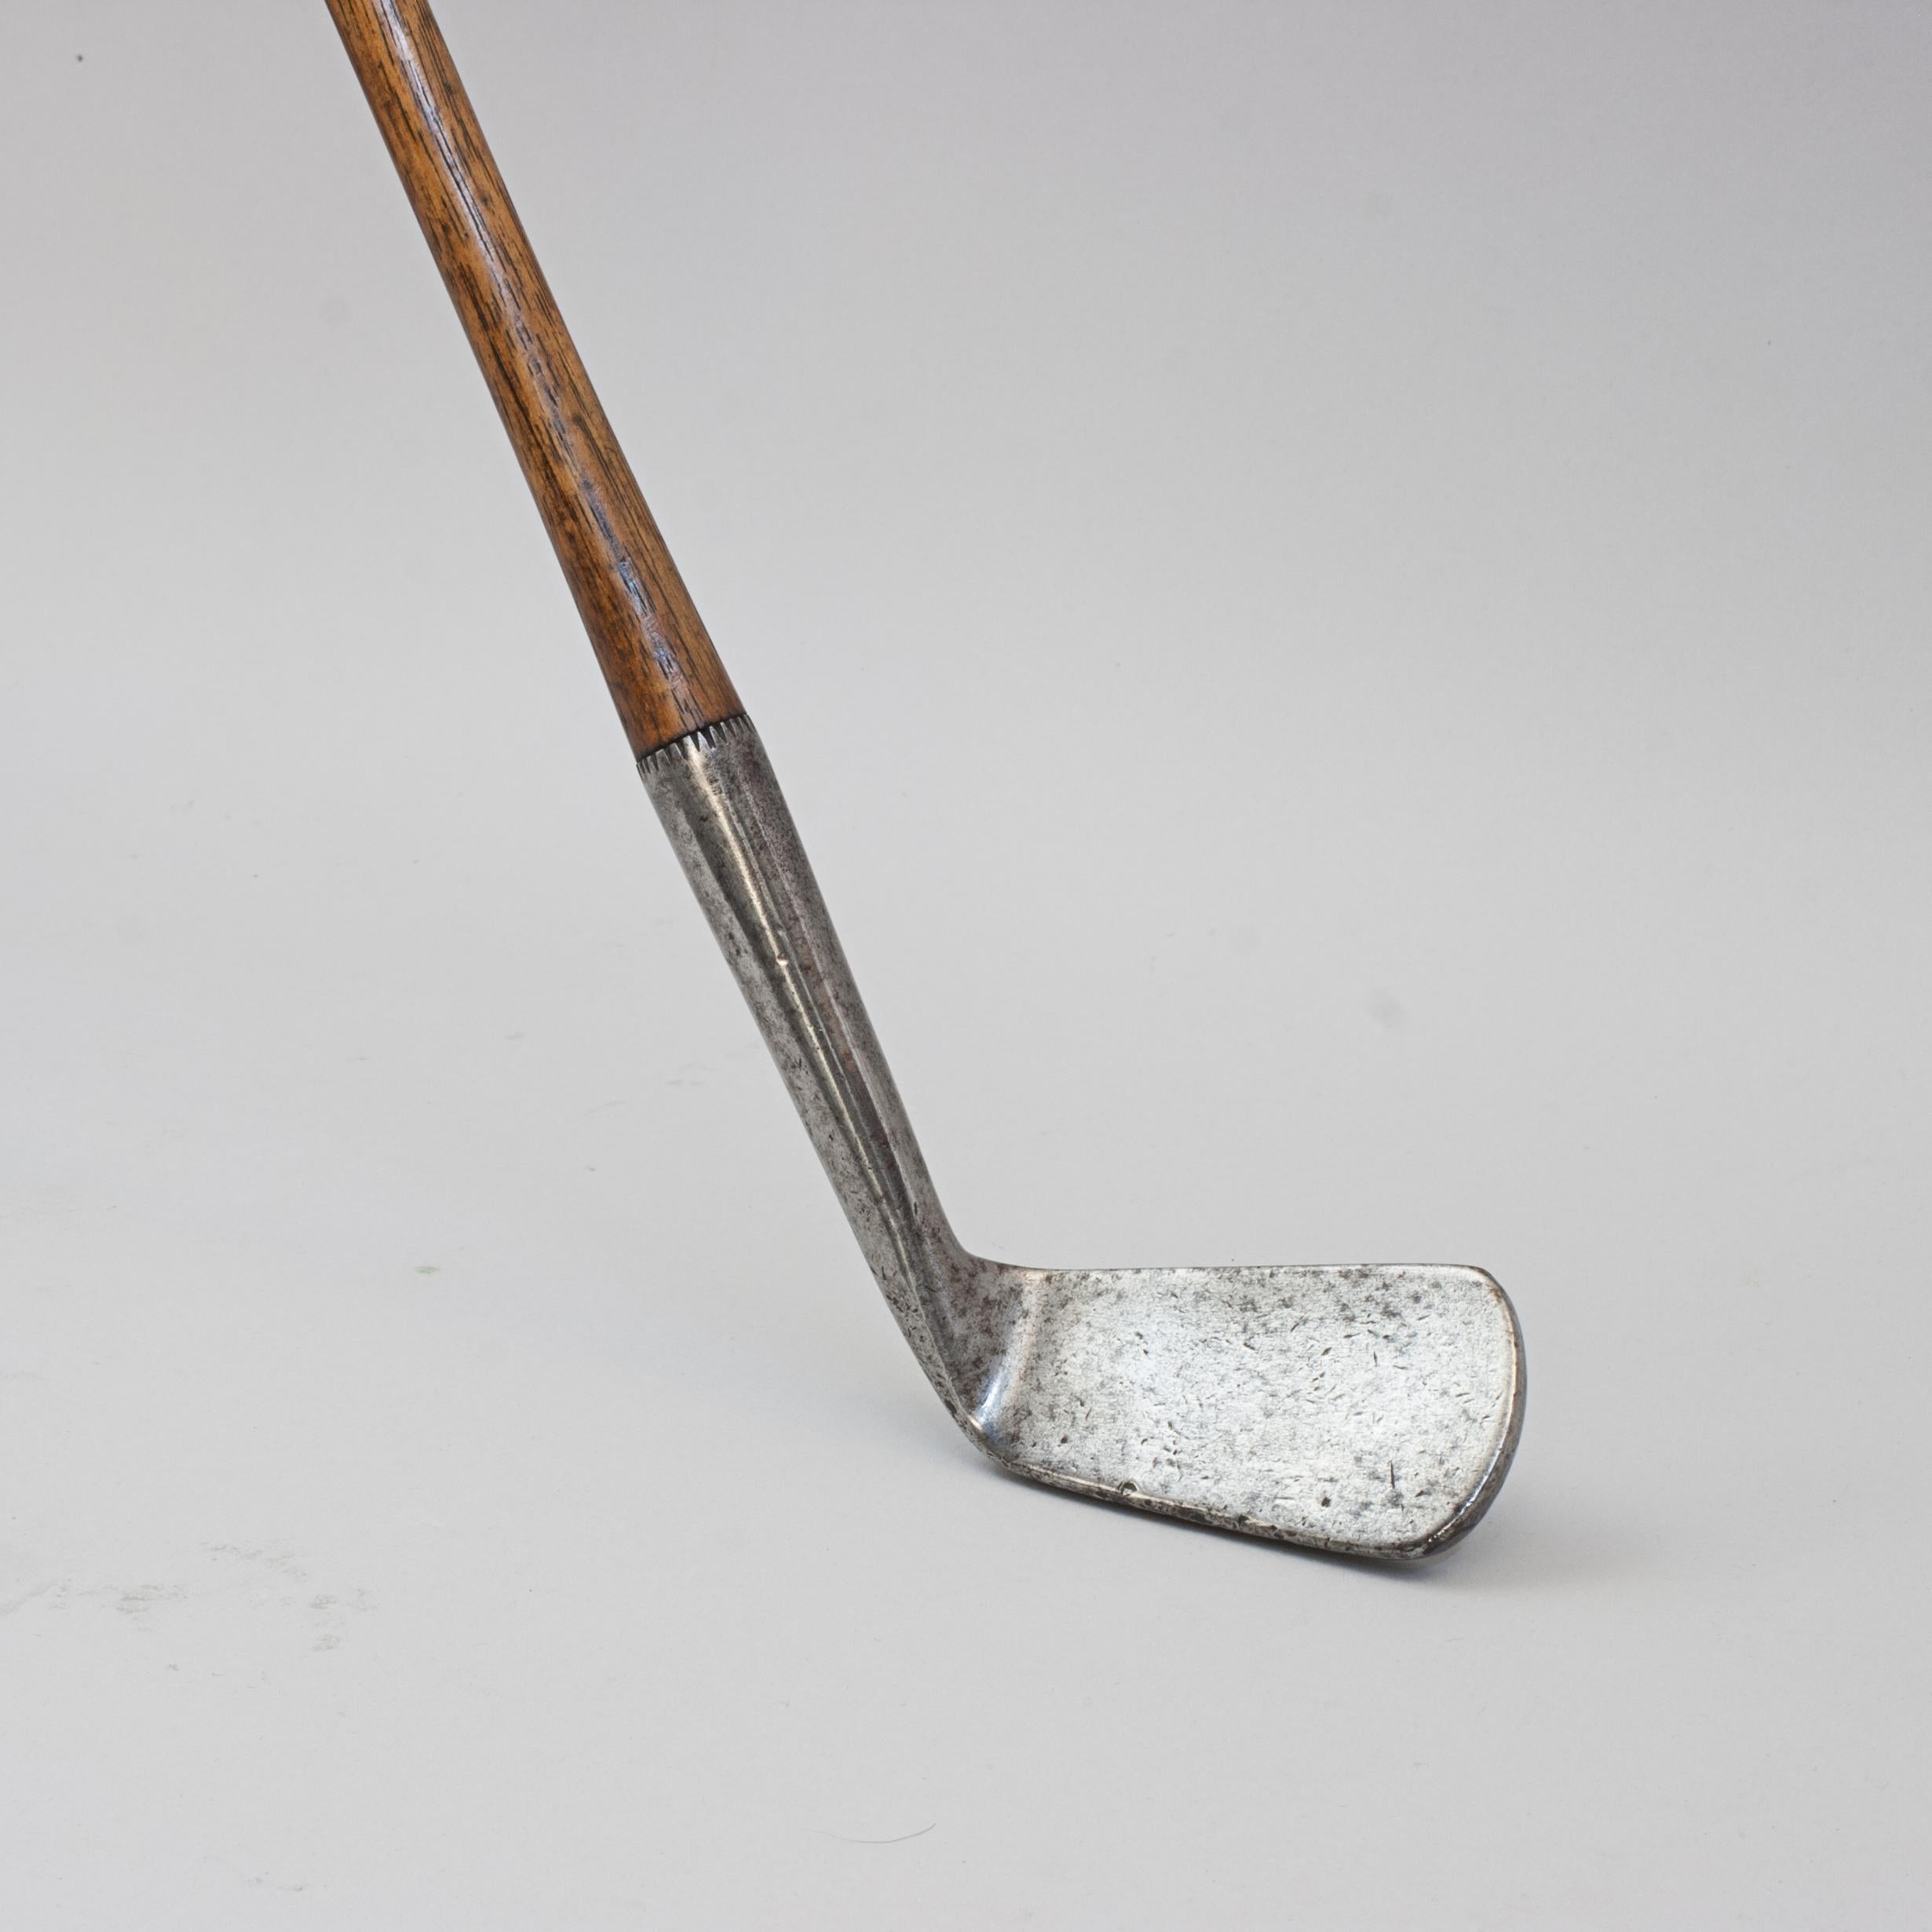 Willie Park Left Handed Smooth Face Golf Club.
This early Willie Park Jr. hickory shafted lofting iron has a smooth face, original hickory shaft and the remains of the original sheepskin grip. This is a fine example of an early lofting iron with a